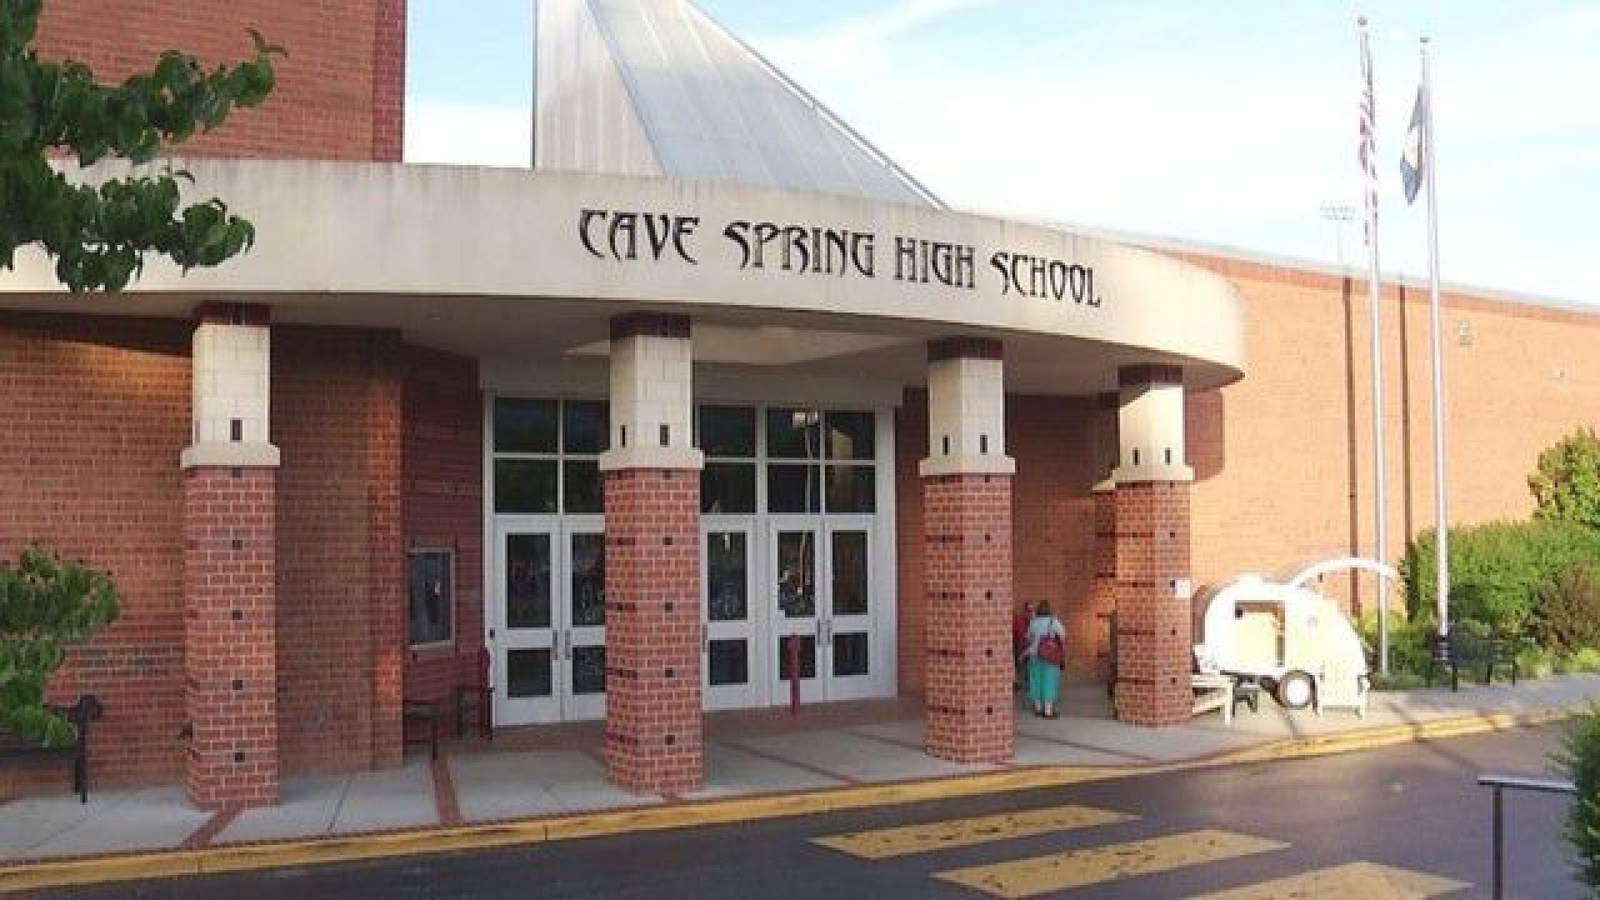 25 COVID-19 cases connected to Cave Spring High School construction work